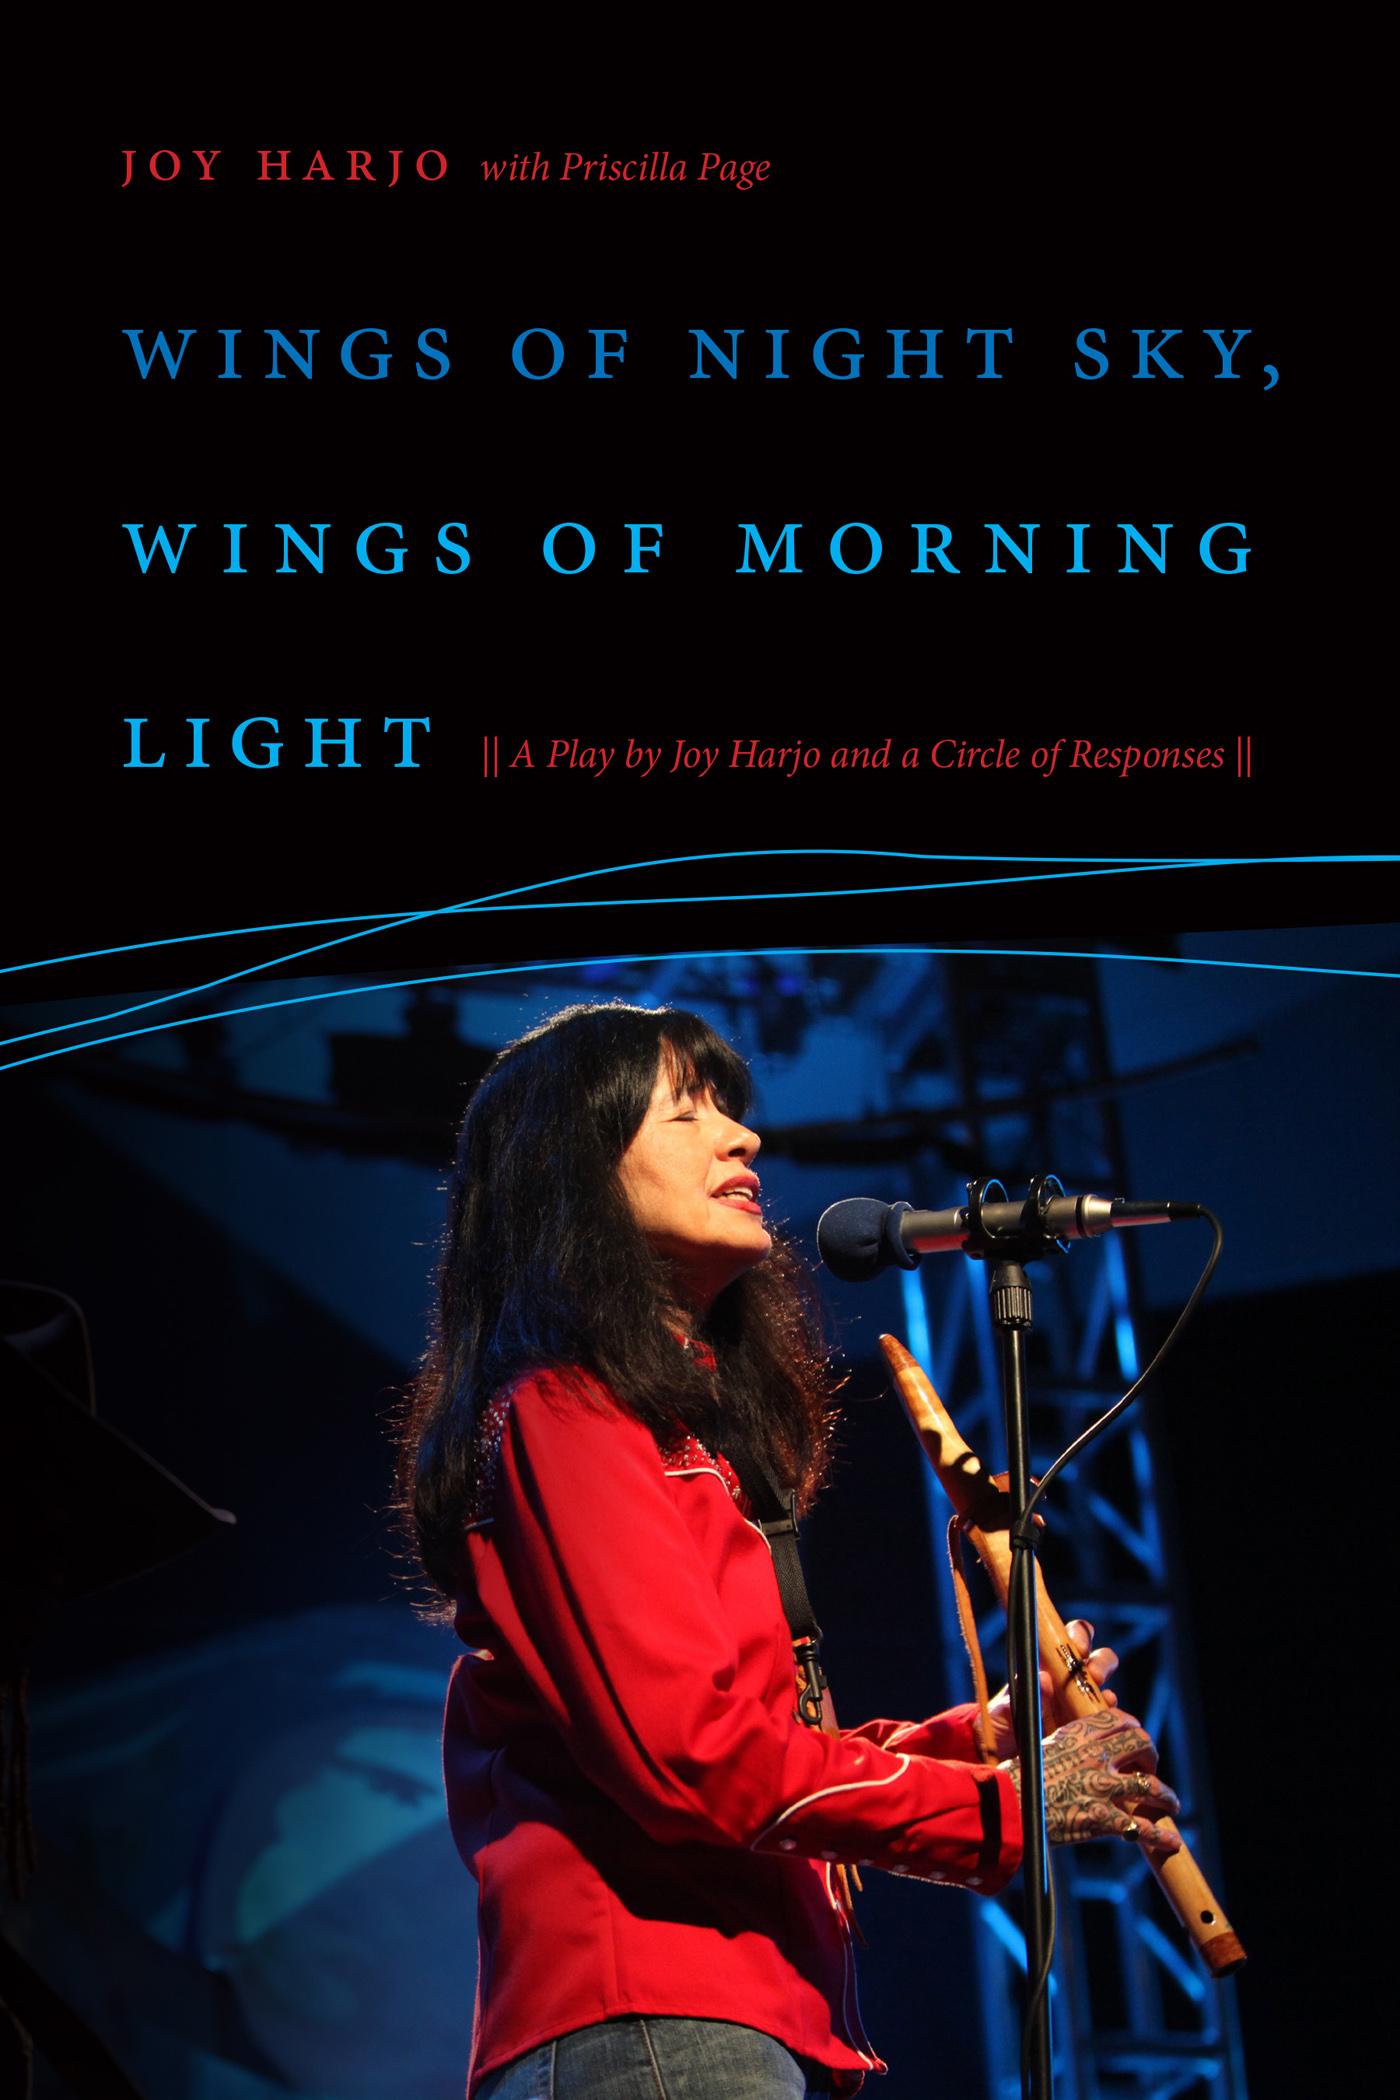 WINGS OF NIGHT SKY WINGS OF MORNING LIGHT Joy Harjo with Priscilla Page - photo 1